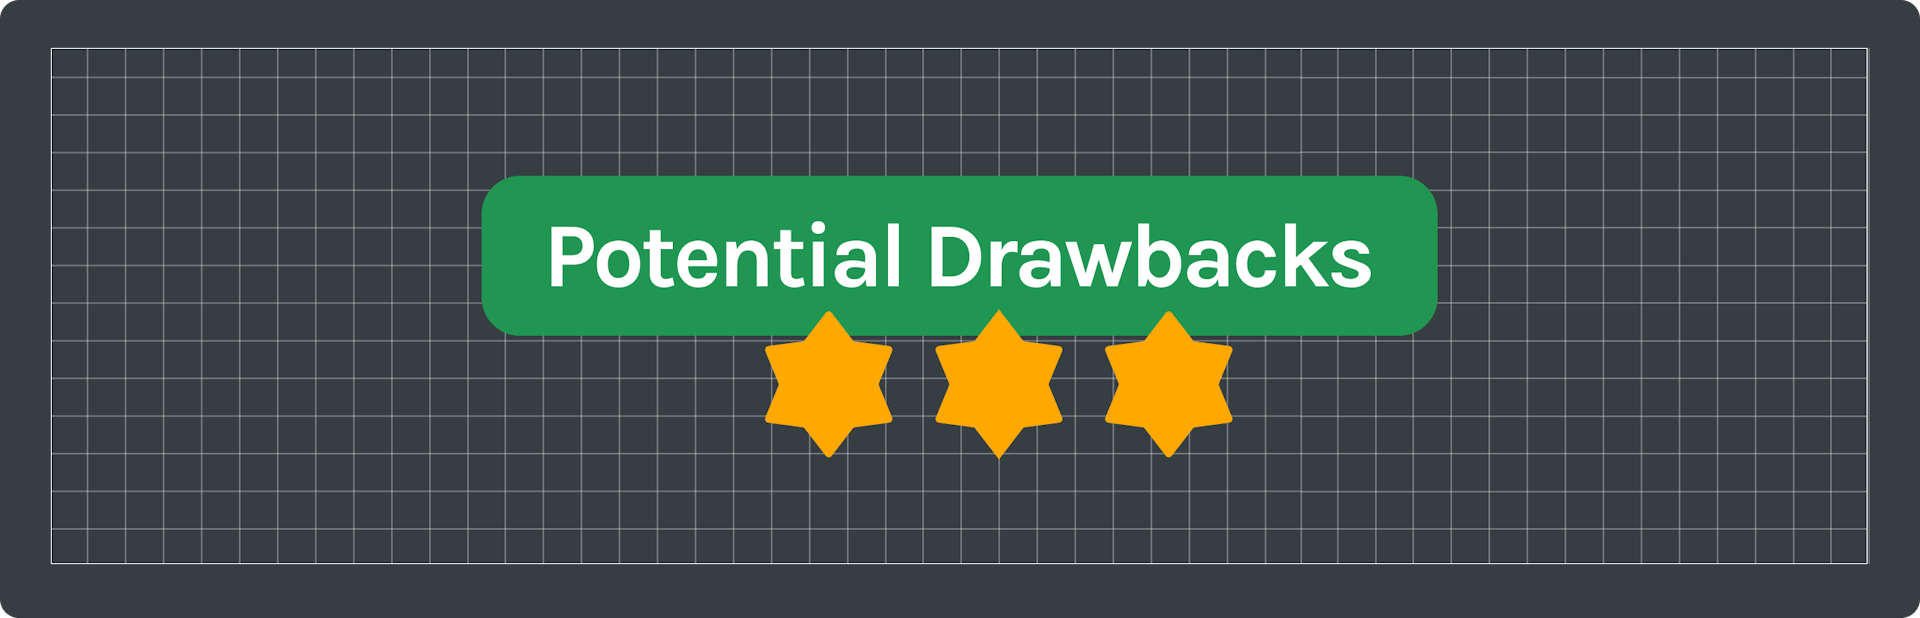 text saying "potential drawbacks" with three yellow stars